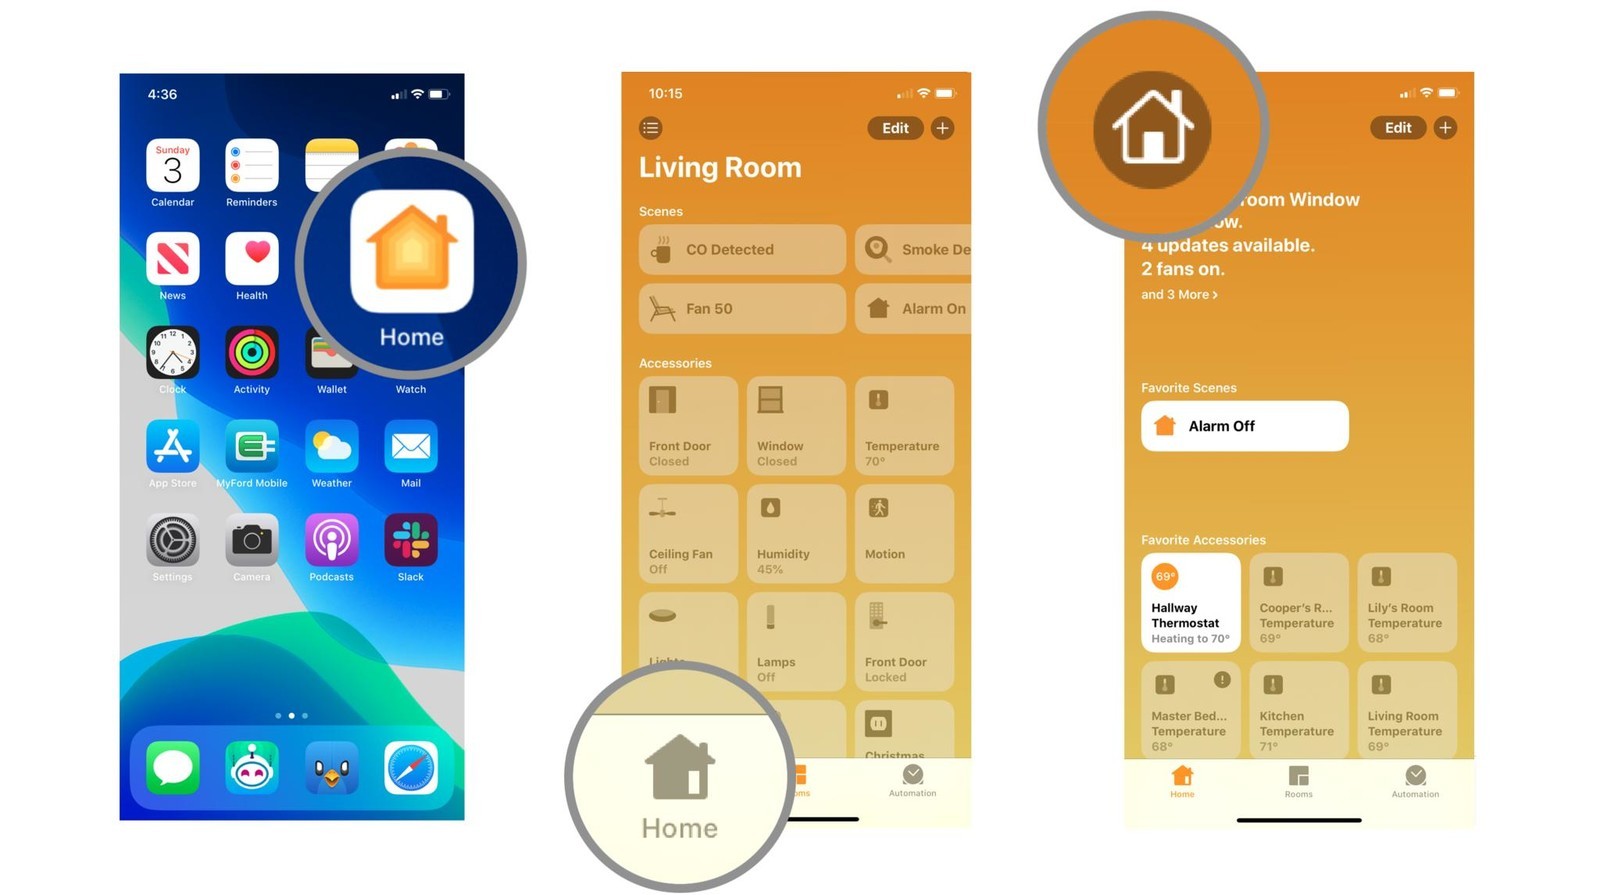 Steps 1-3 depicting how to rename home in the Home app